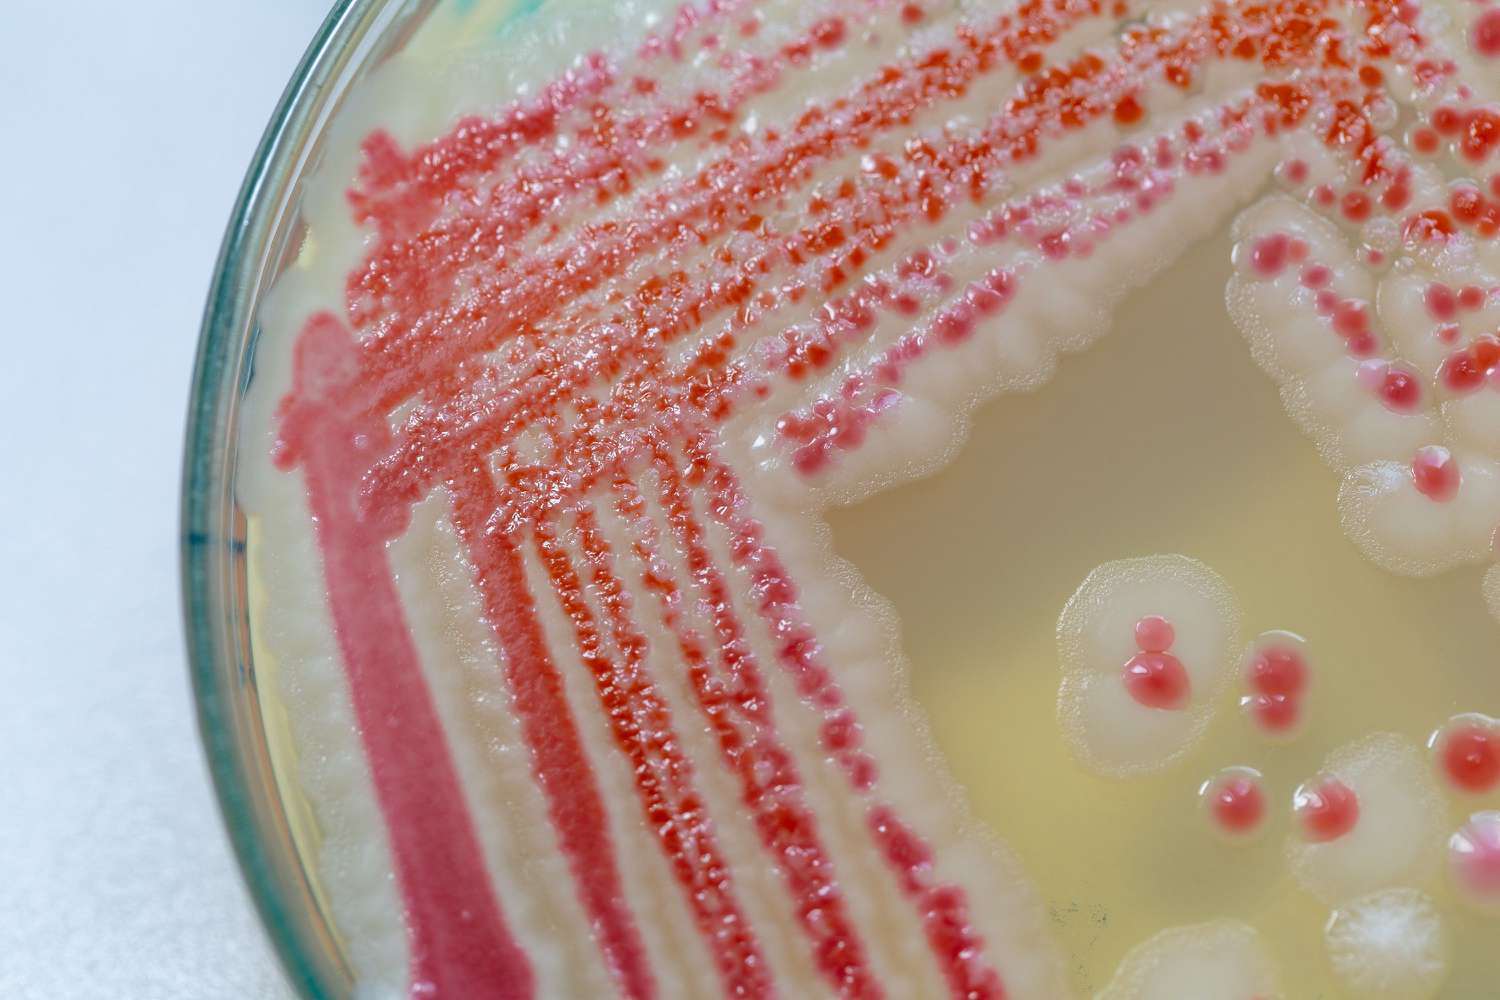 Pink Mold: Don’t Let Its Pretty Color Fool You!